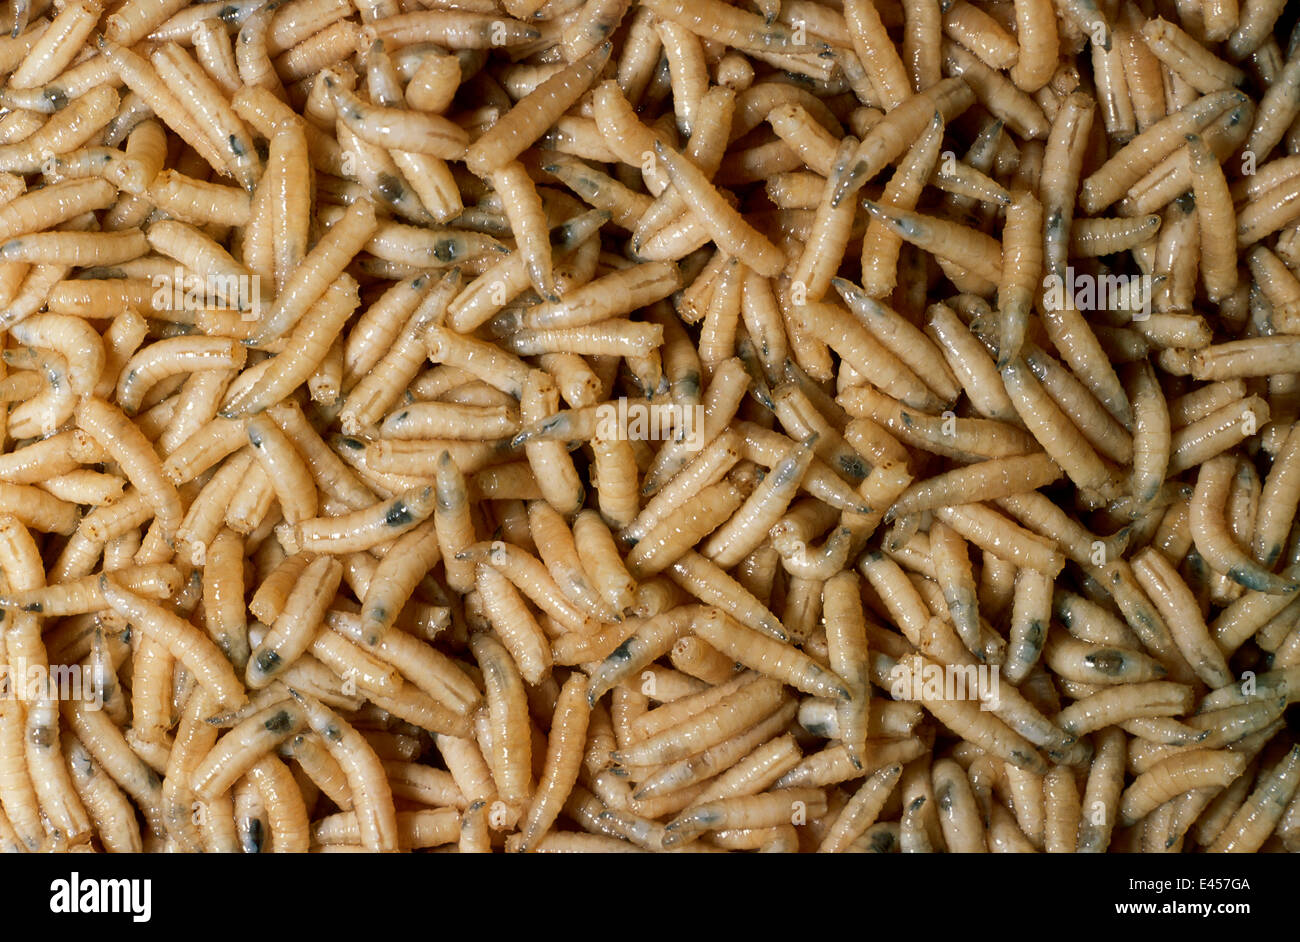 Common house fly maggots {Musca domestica} Stock Photo - Alamy